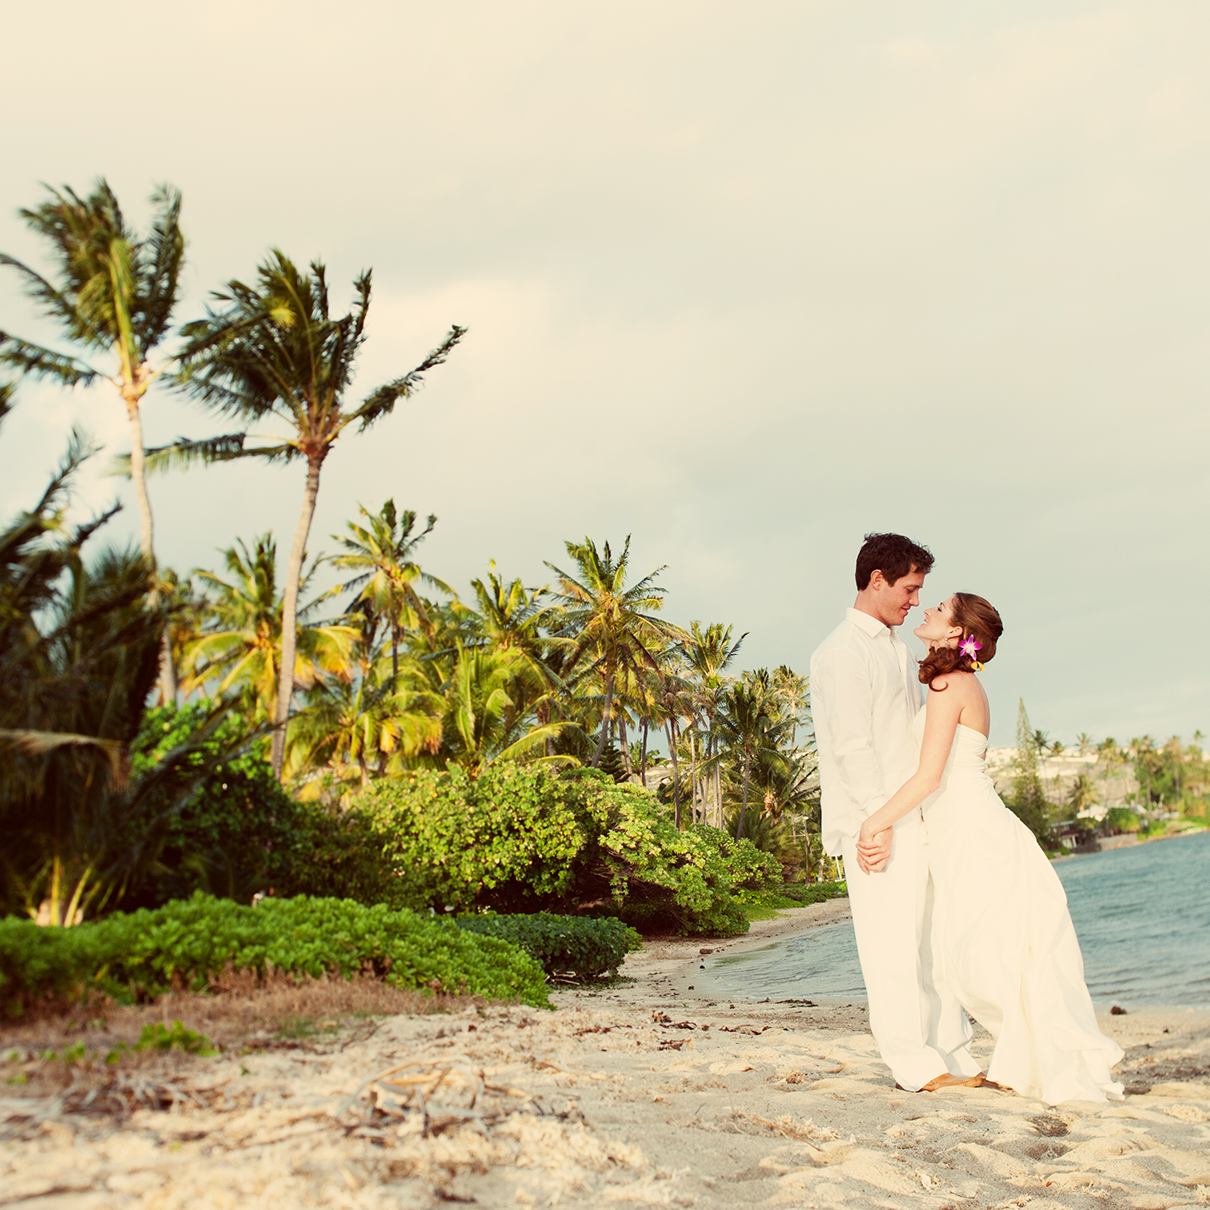 10 Reasons Why Couples Have a Destination Wedding